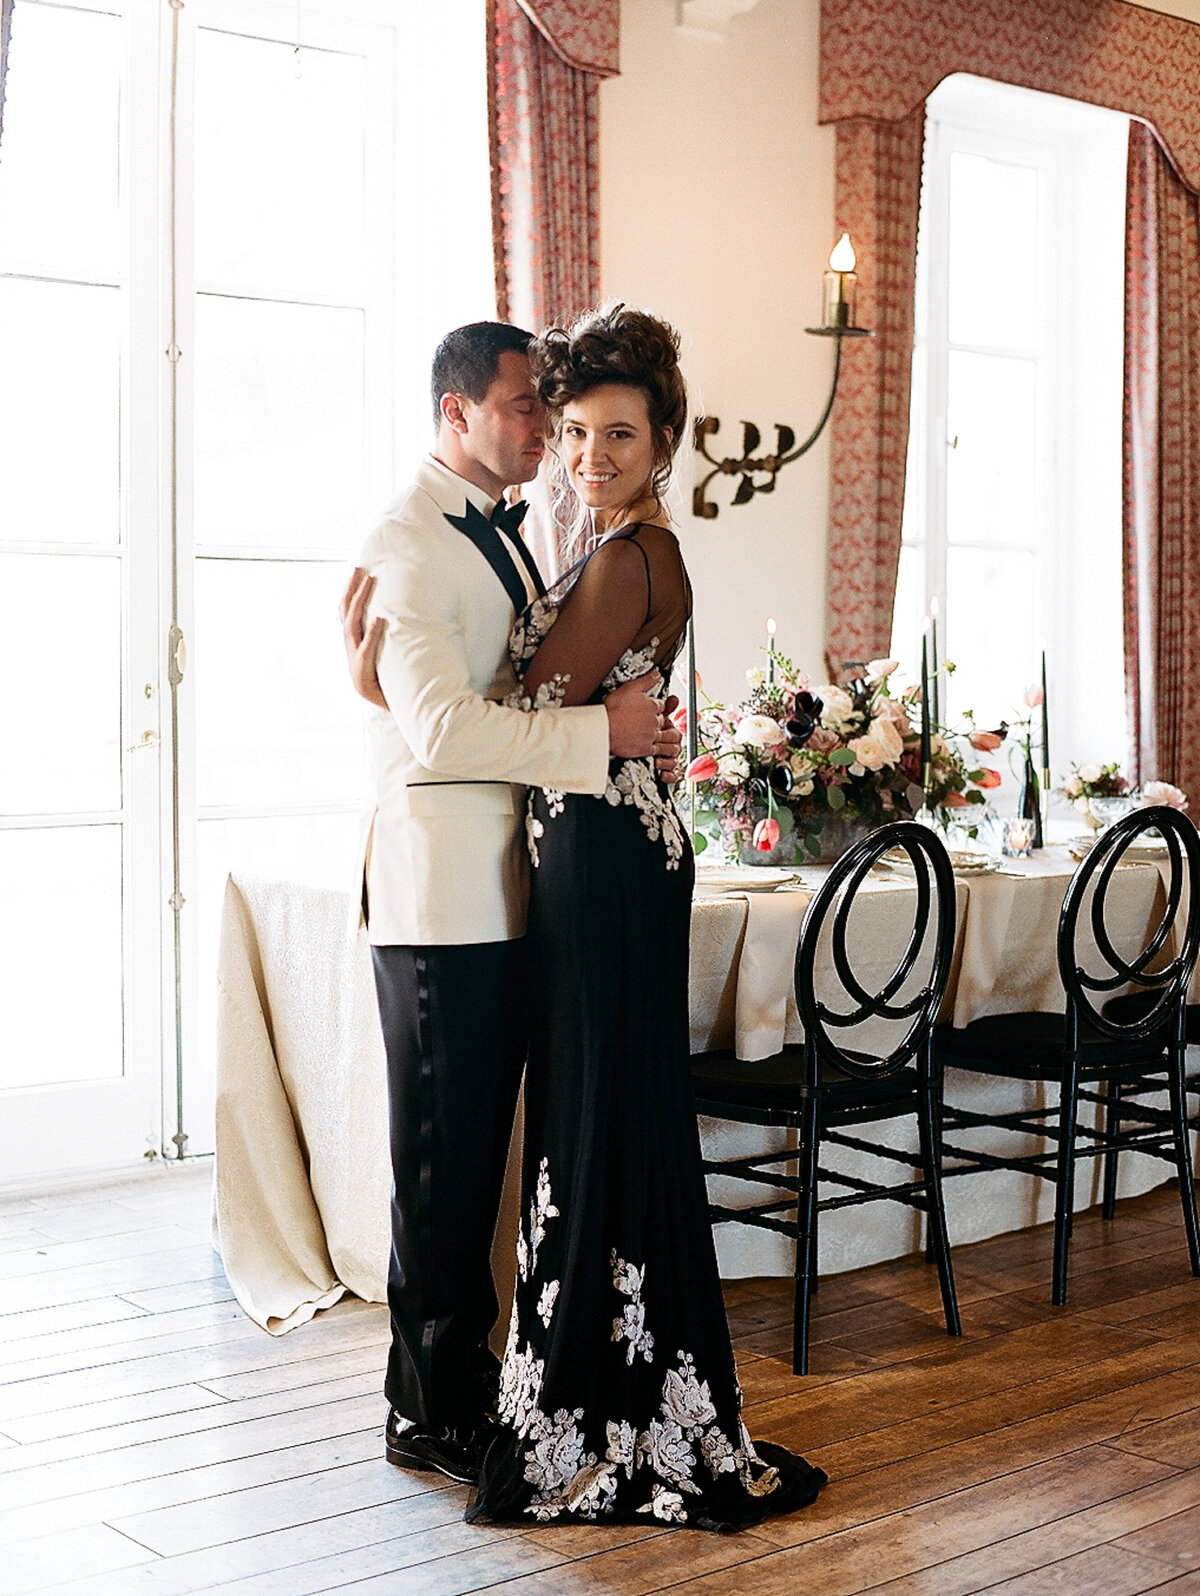 Bride and groom embracing and standing next to wedding reception table